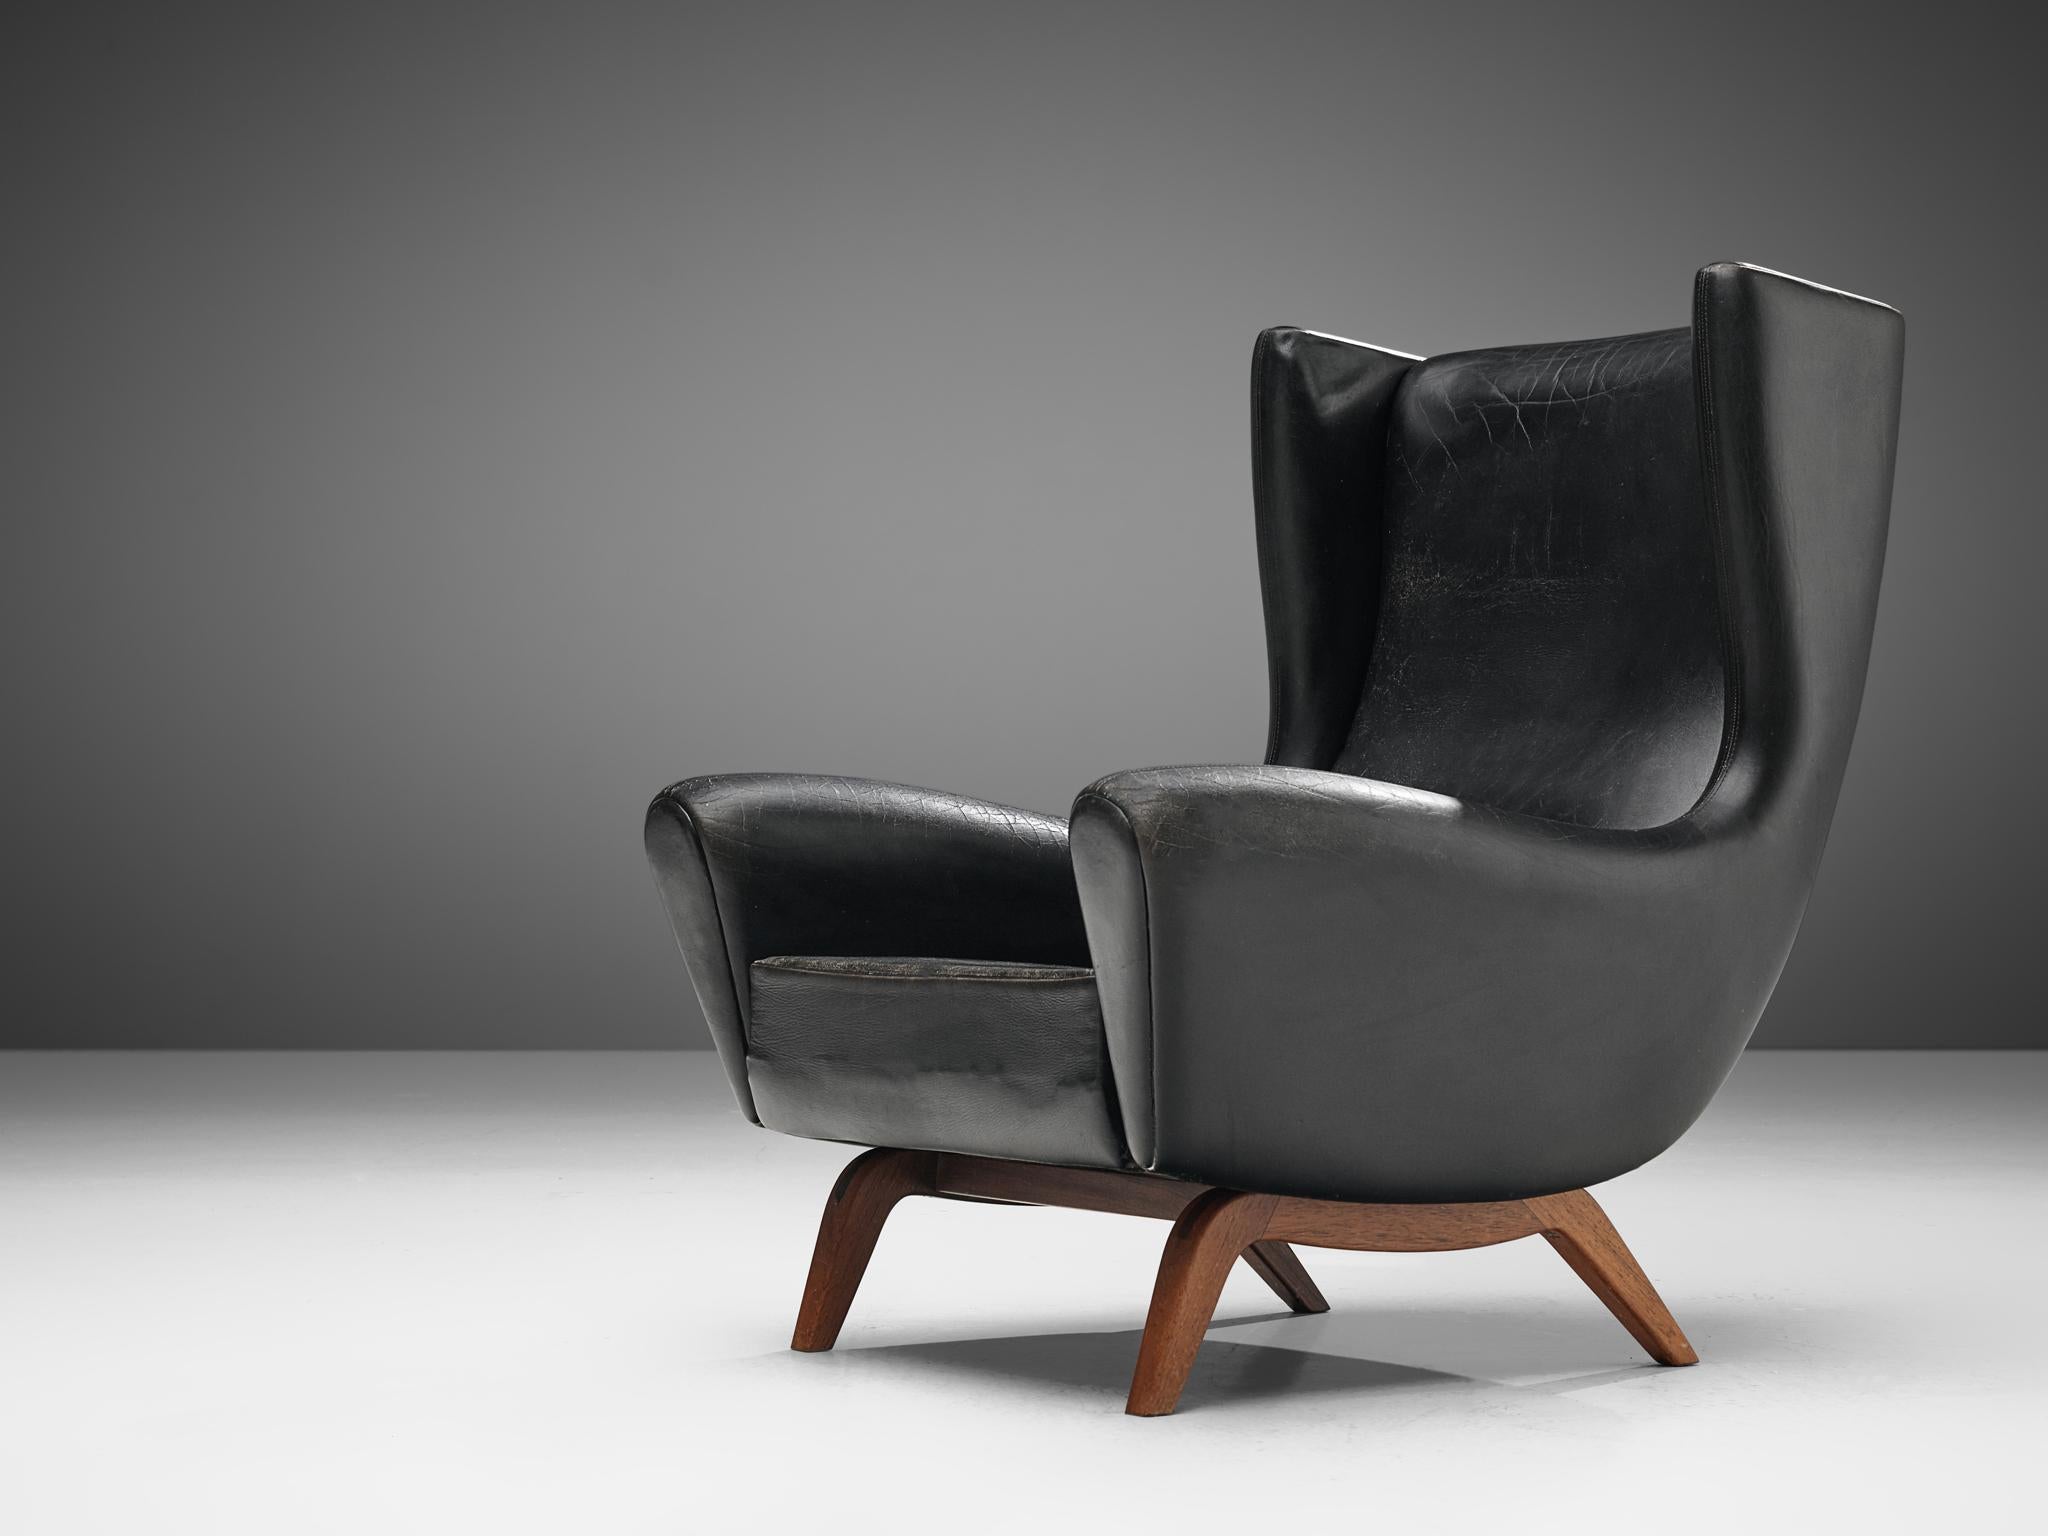 Illum Wikkelsø for Søren Willadsen, wingback chair 'Model 110', teak and black leather, Denmark, 1950s.

This well-designed armchair shows an unusual elegance and great eye for detail, combined with outstanding craftsmanship, which is